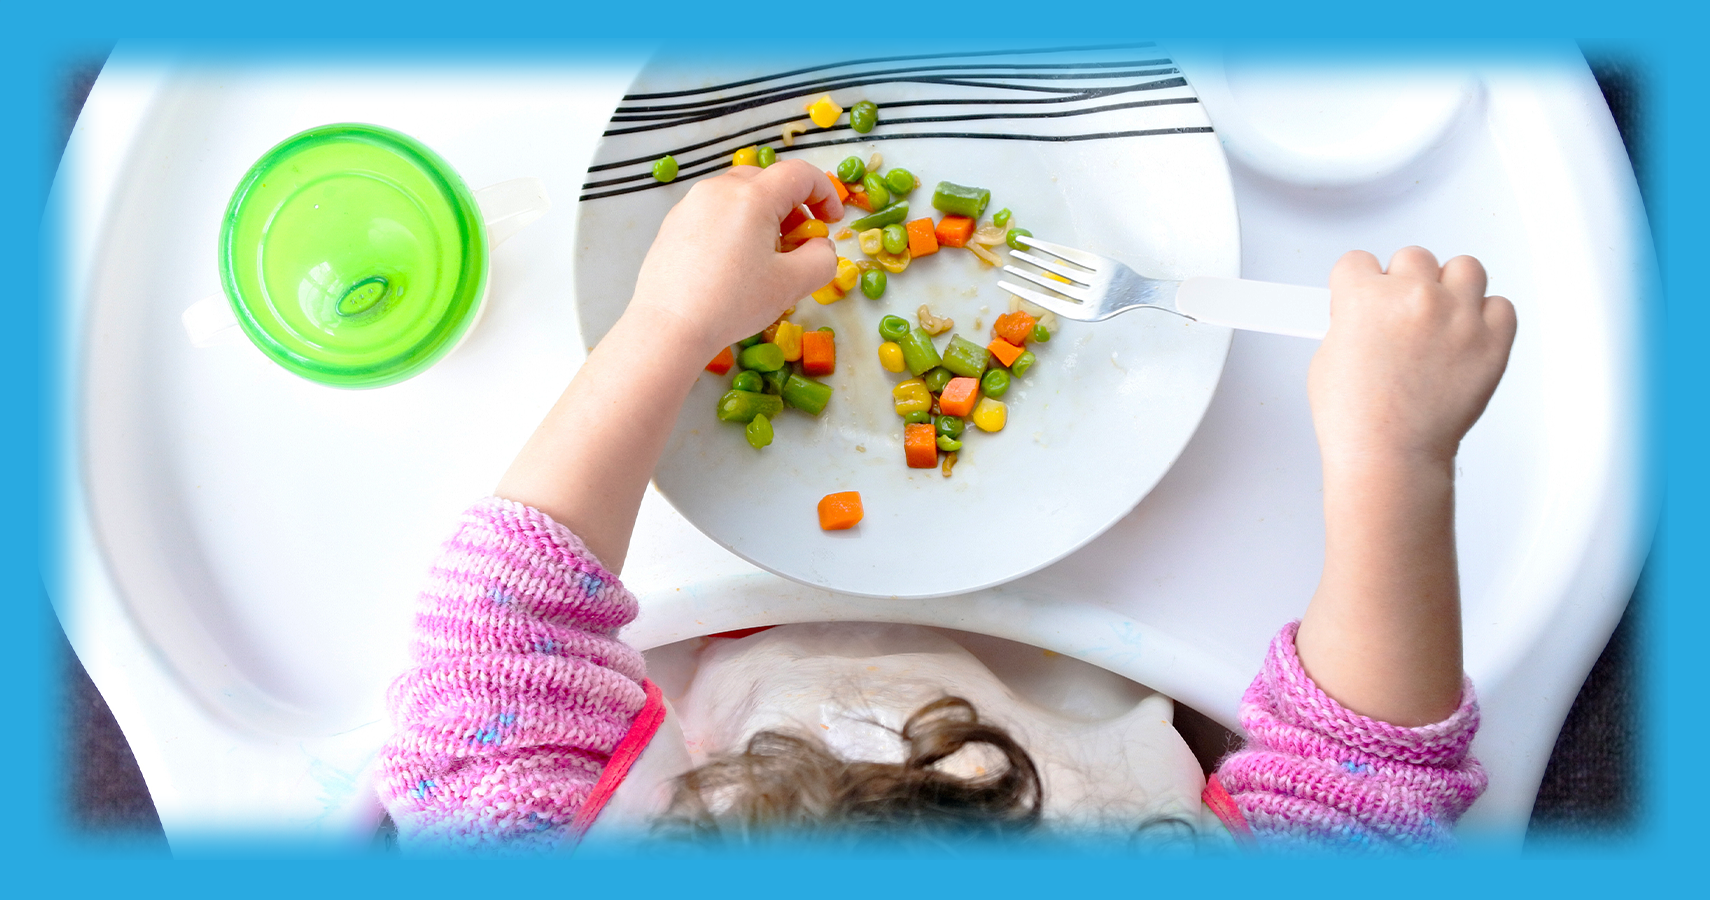 8 YouTube Videos To Teach Your Toddler How To Eat With A Fork & Knife